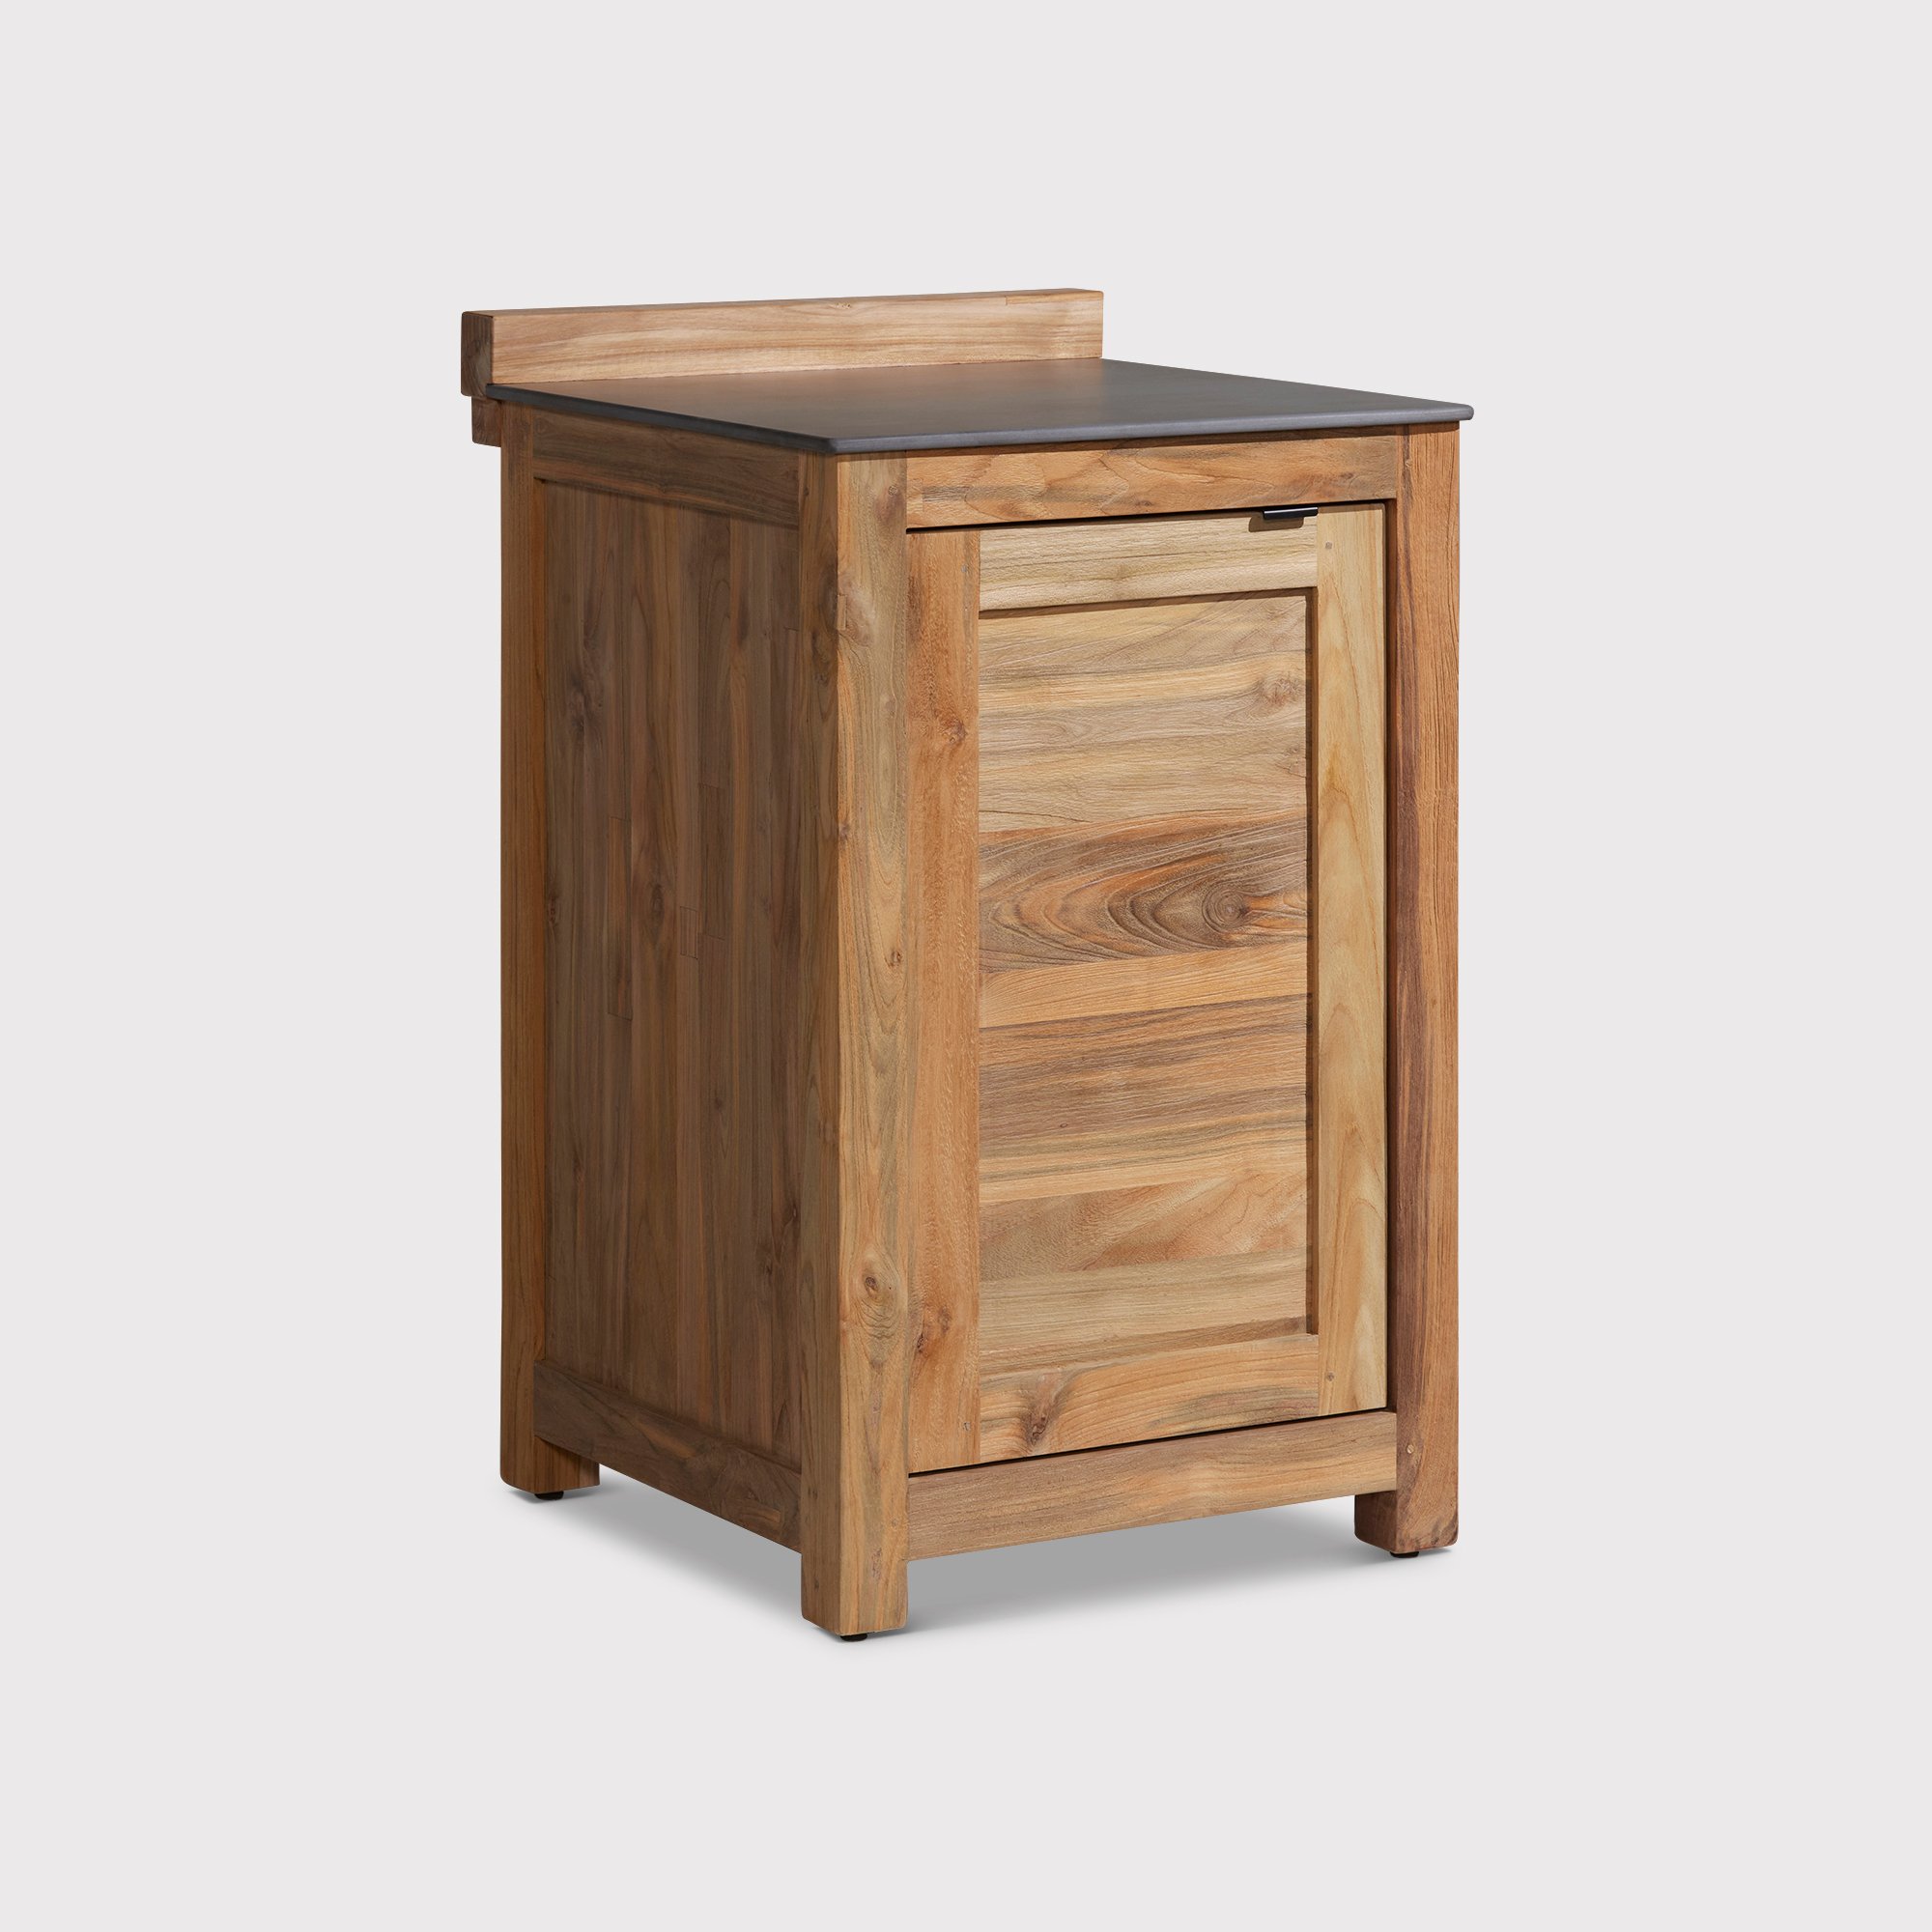 Grenada Grill Table With 1 Door/Shelf | Barker & Stonehouse